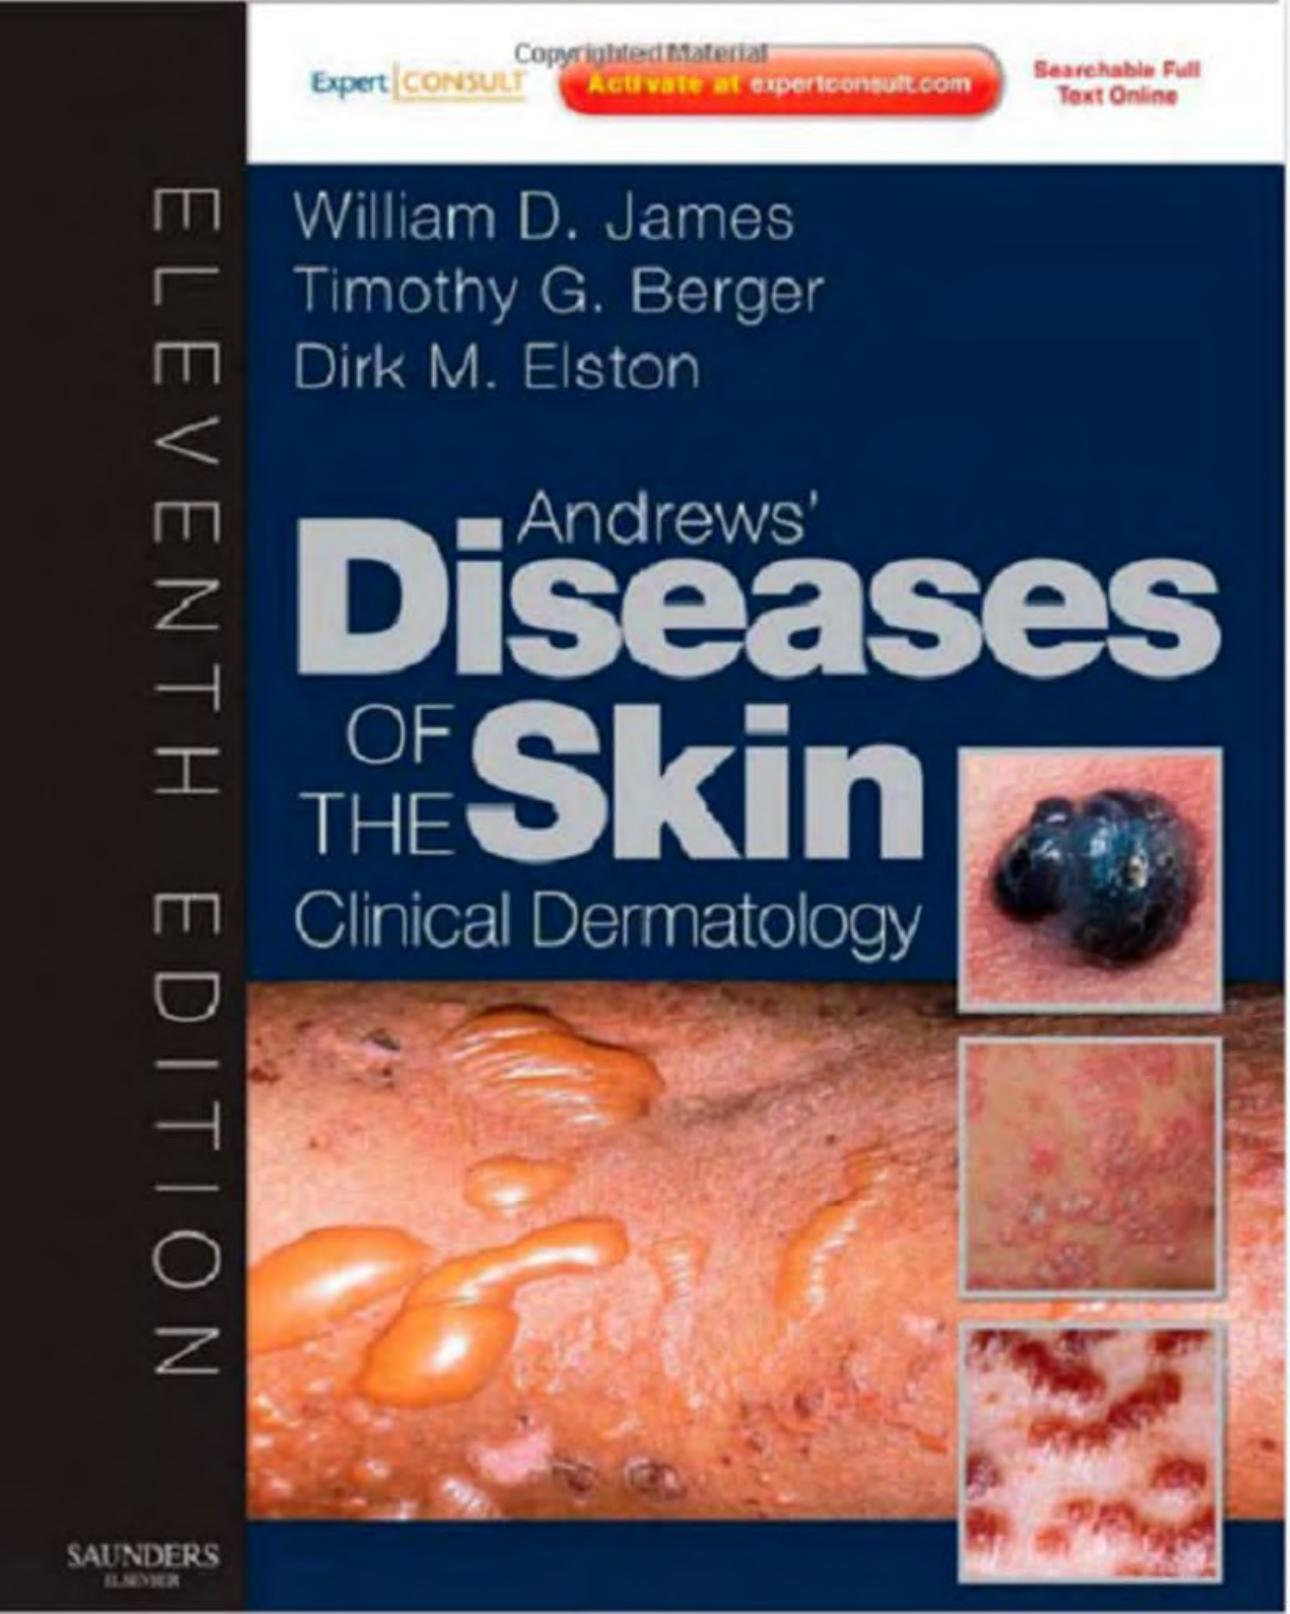 Andrews' Diseases of the Skin  Clinical Dermatology